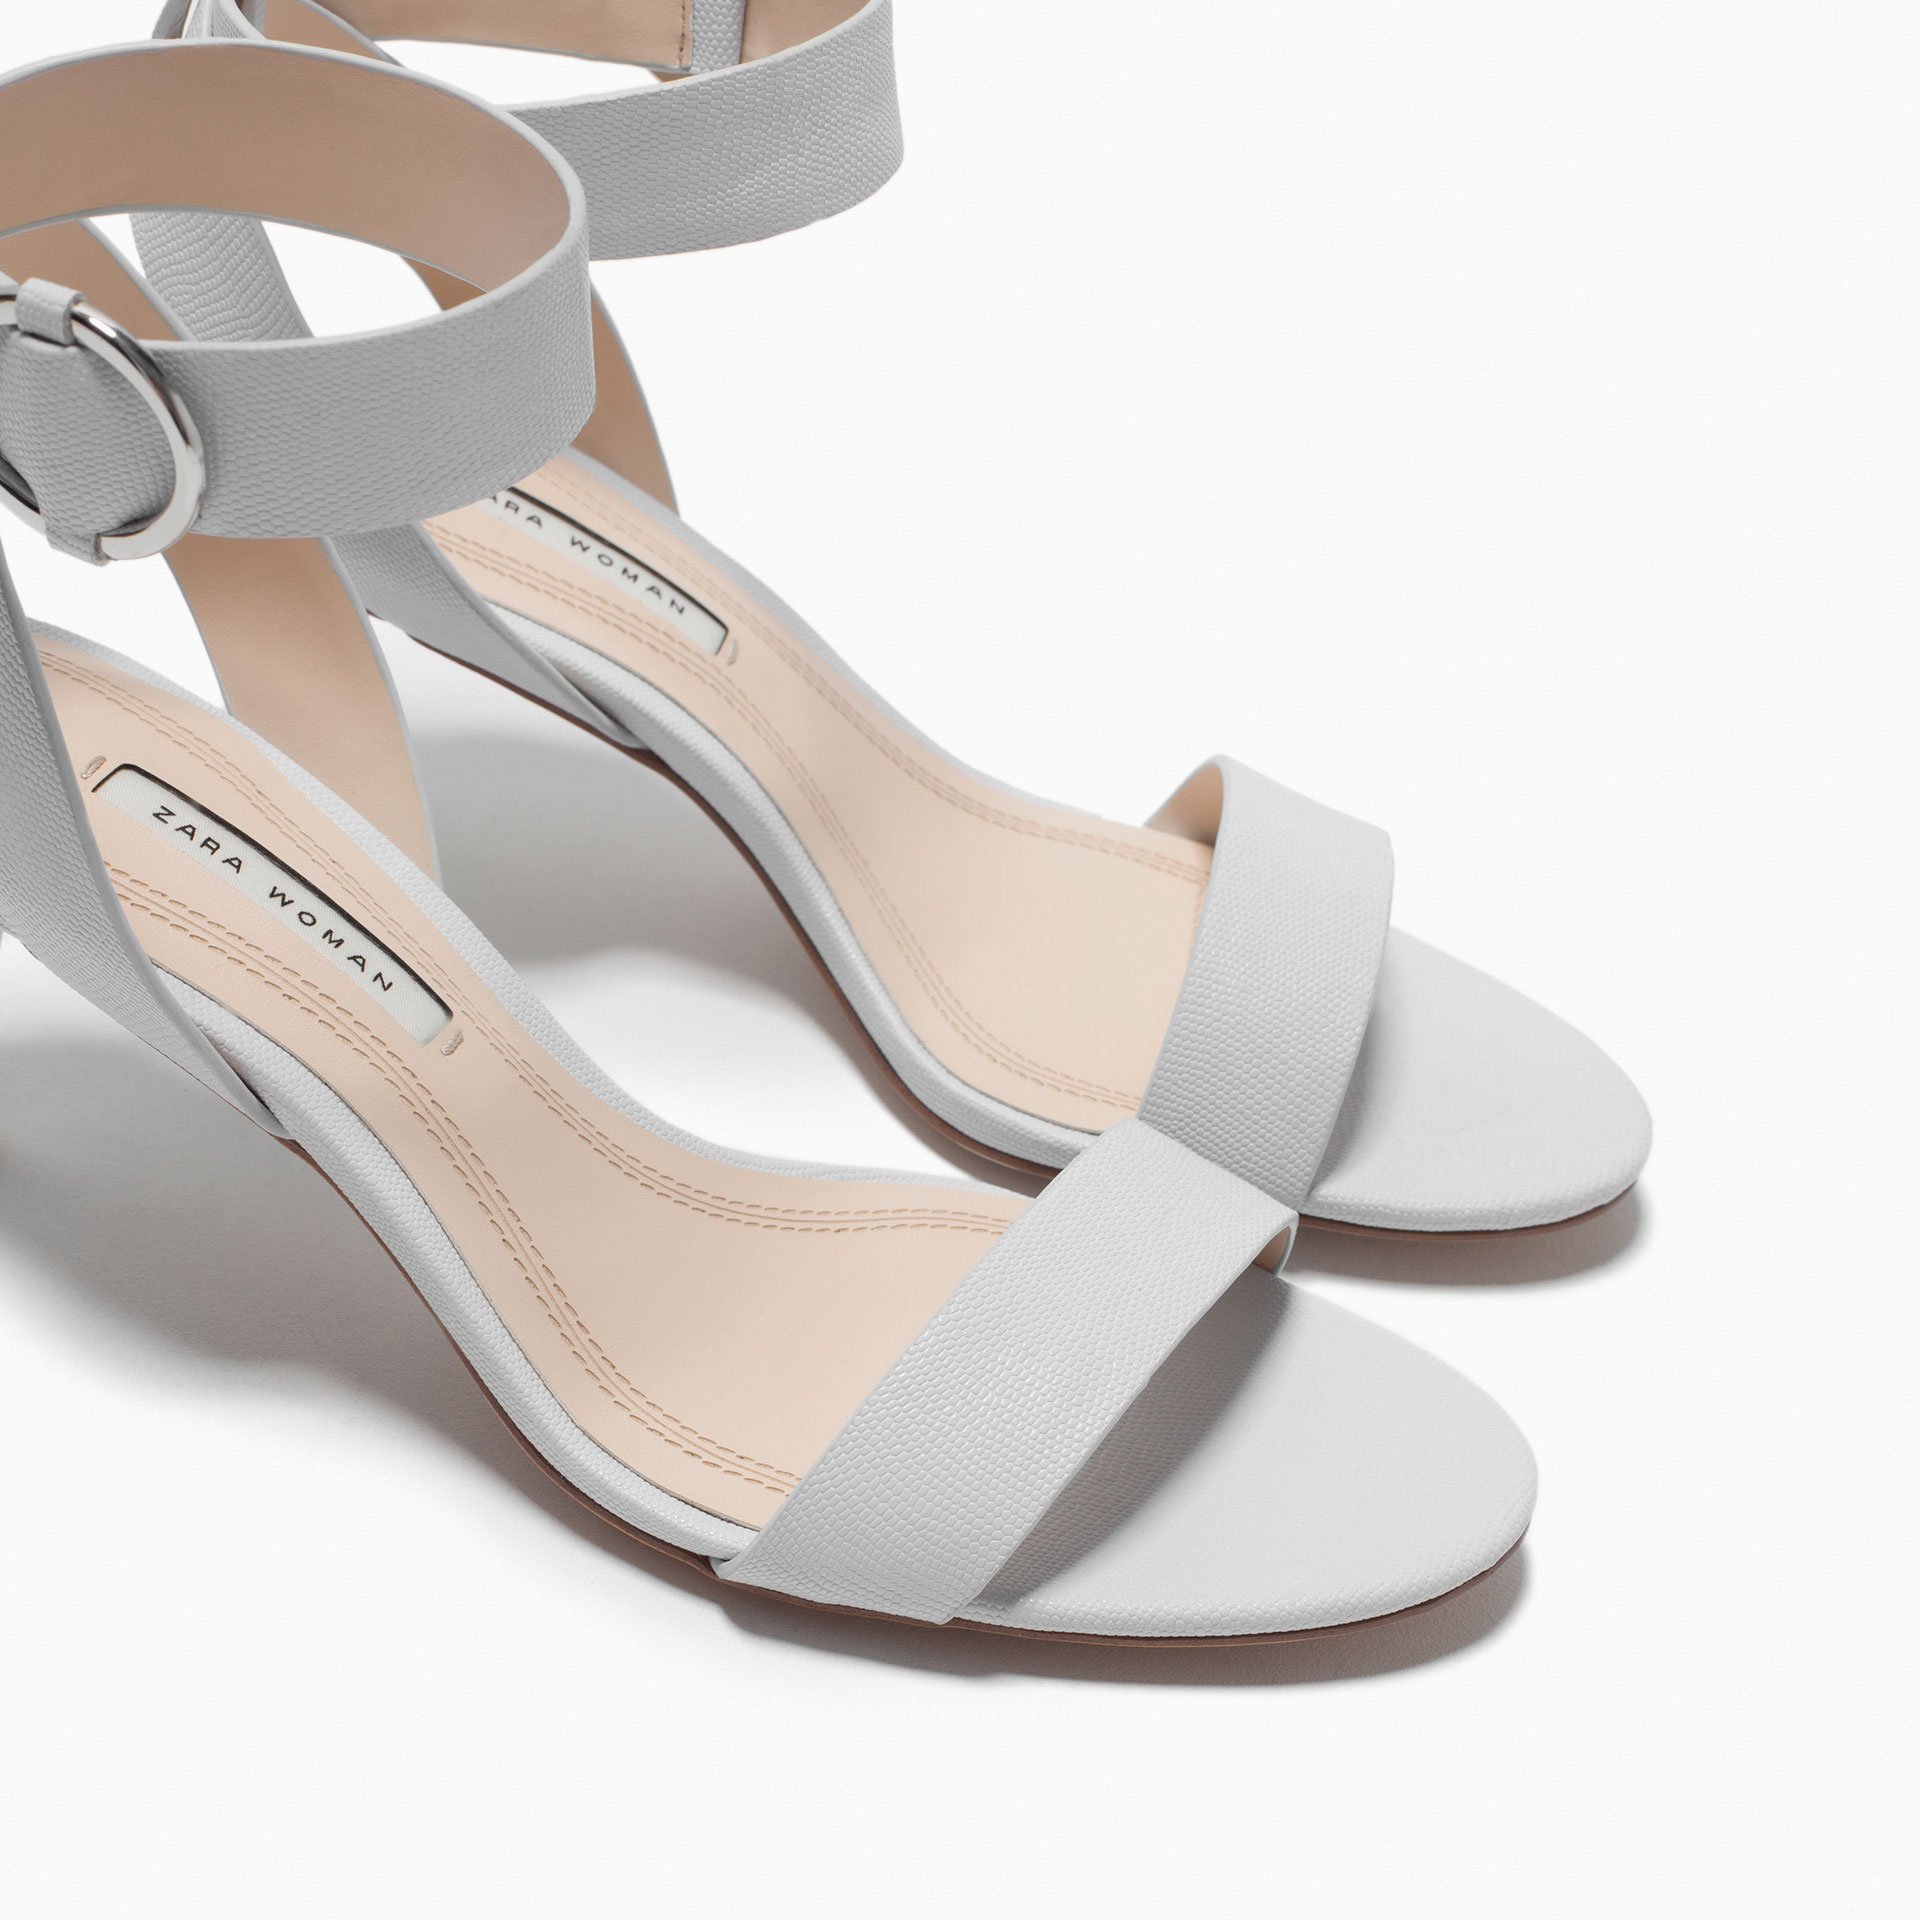 Zara Mid-Heel Sandals With Ankle Strap Mid-Heel Sandals With Ankle ...